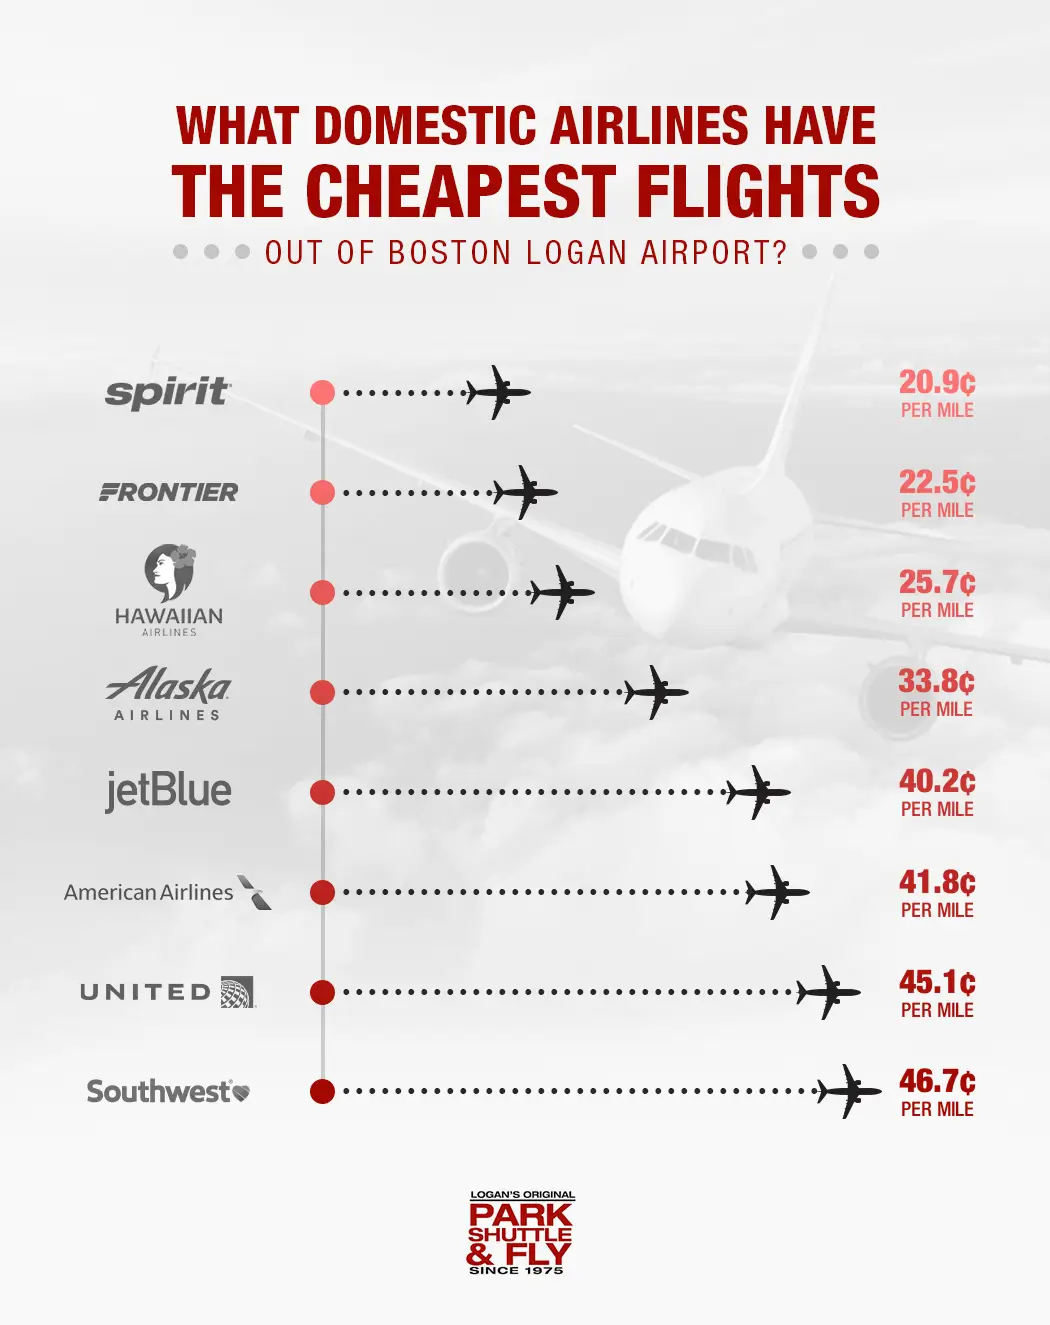 Which airline is the cheapest?